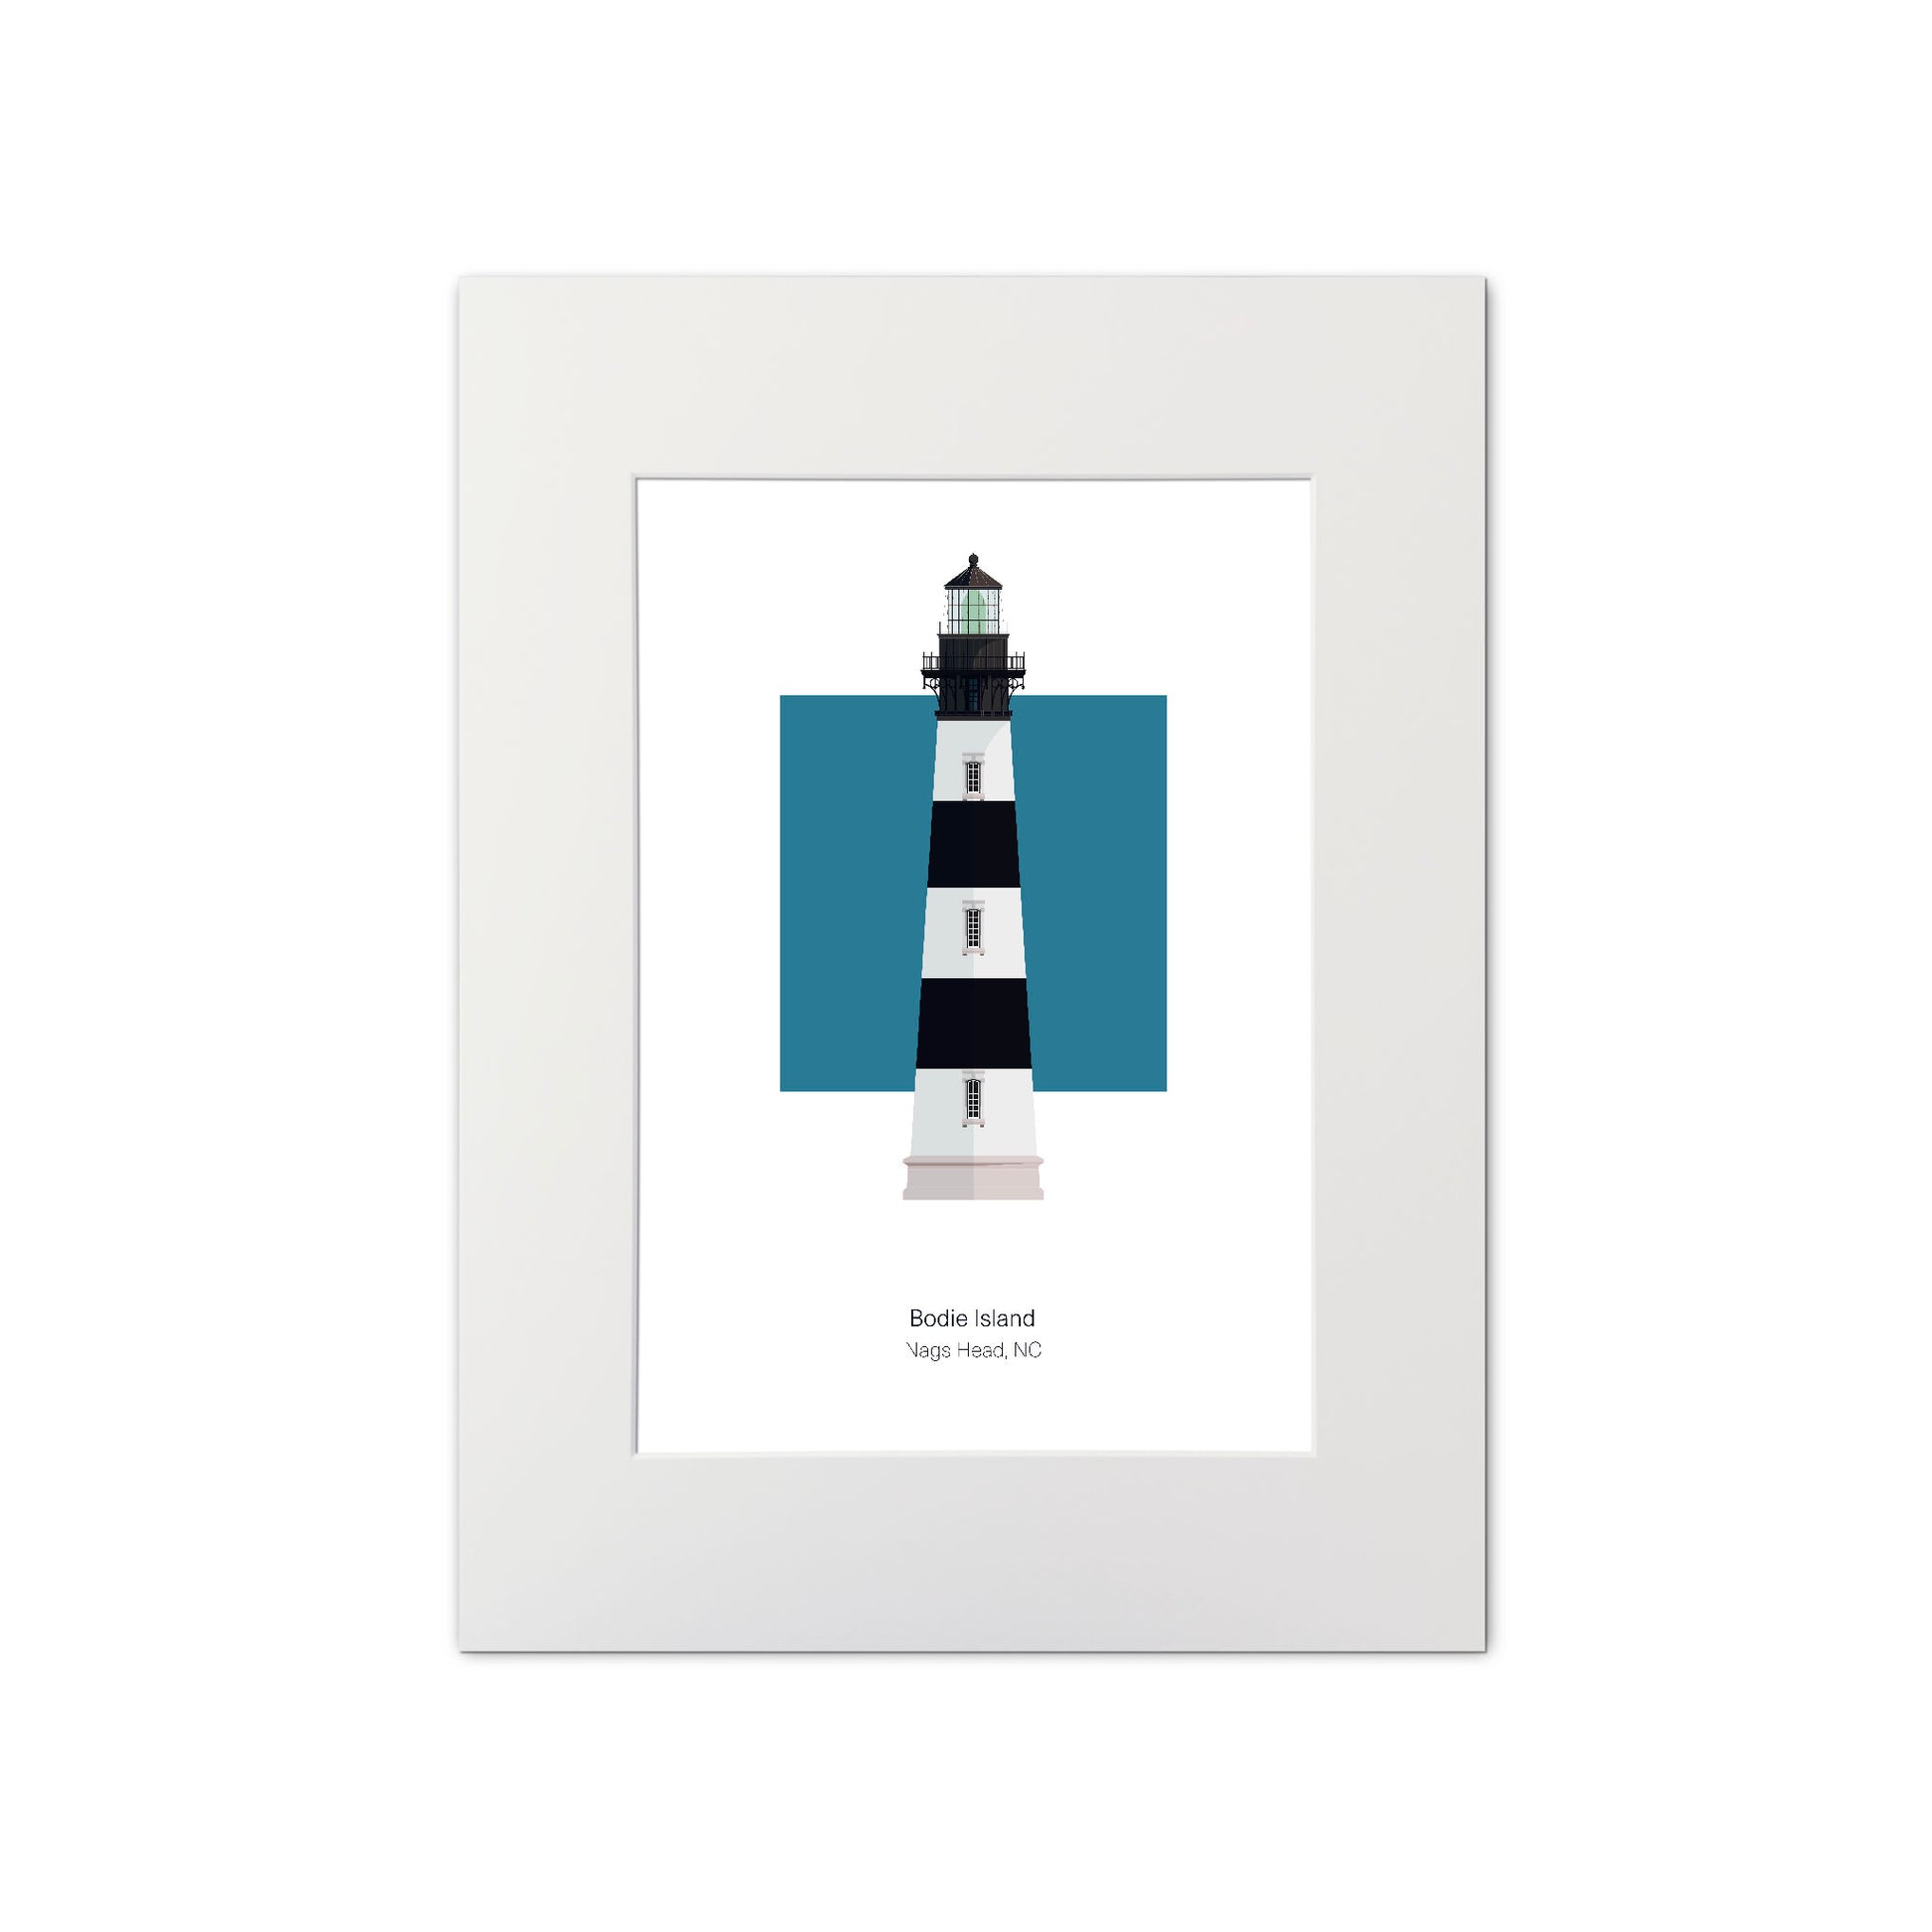 Illustration of the Bodie Island lighthouse, North Carolina, USA. On a white background with aqua blue square as a backdrop., mounted and measuring 11"x14" (30x40cm).